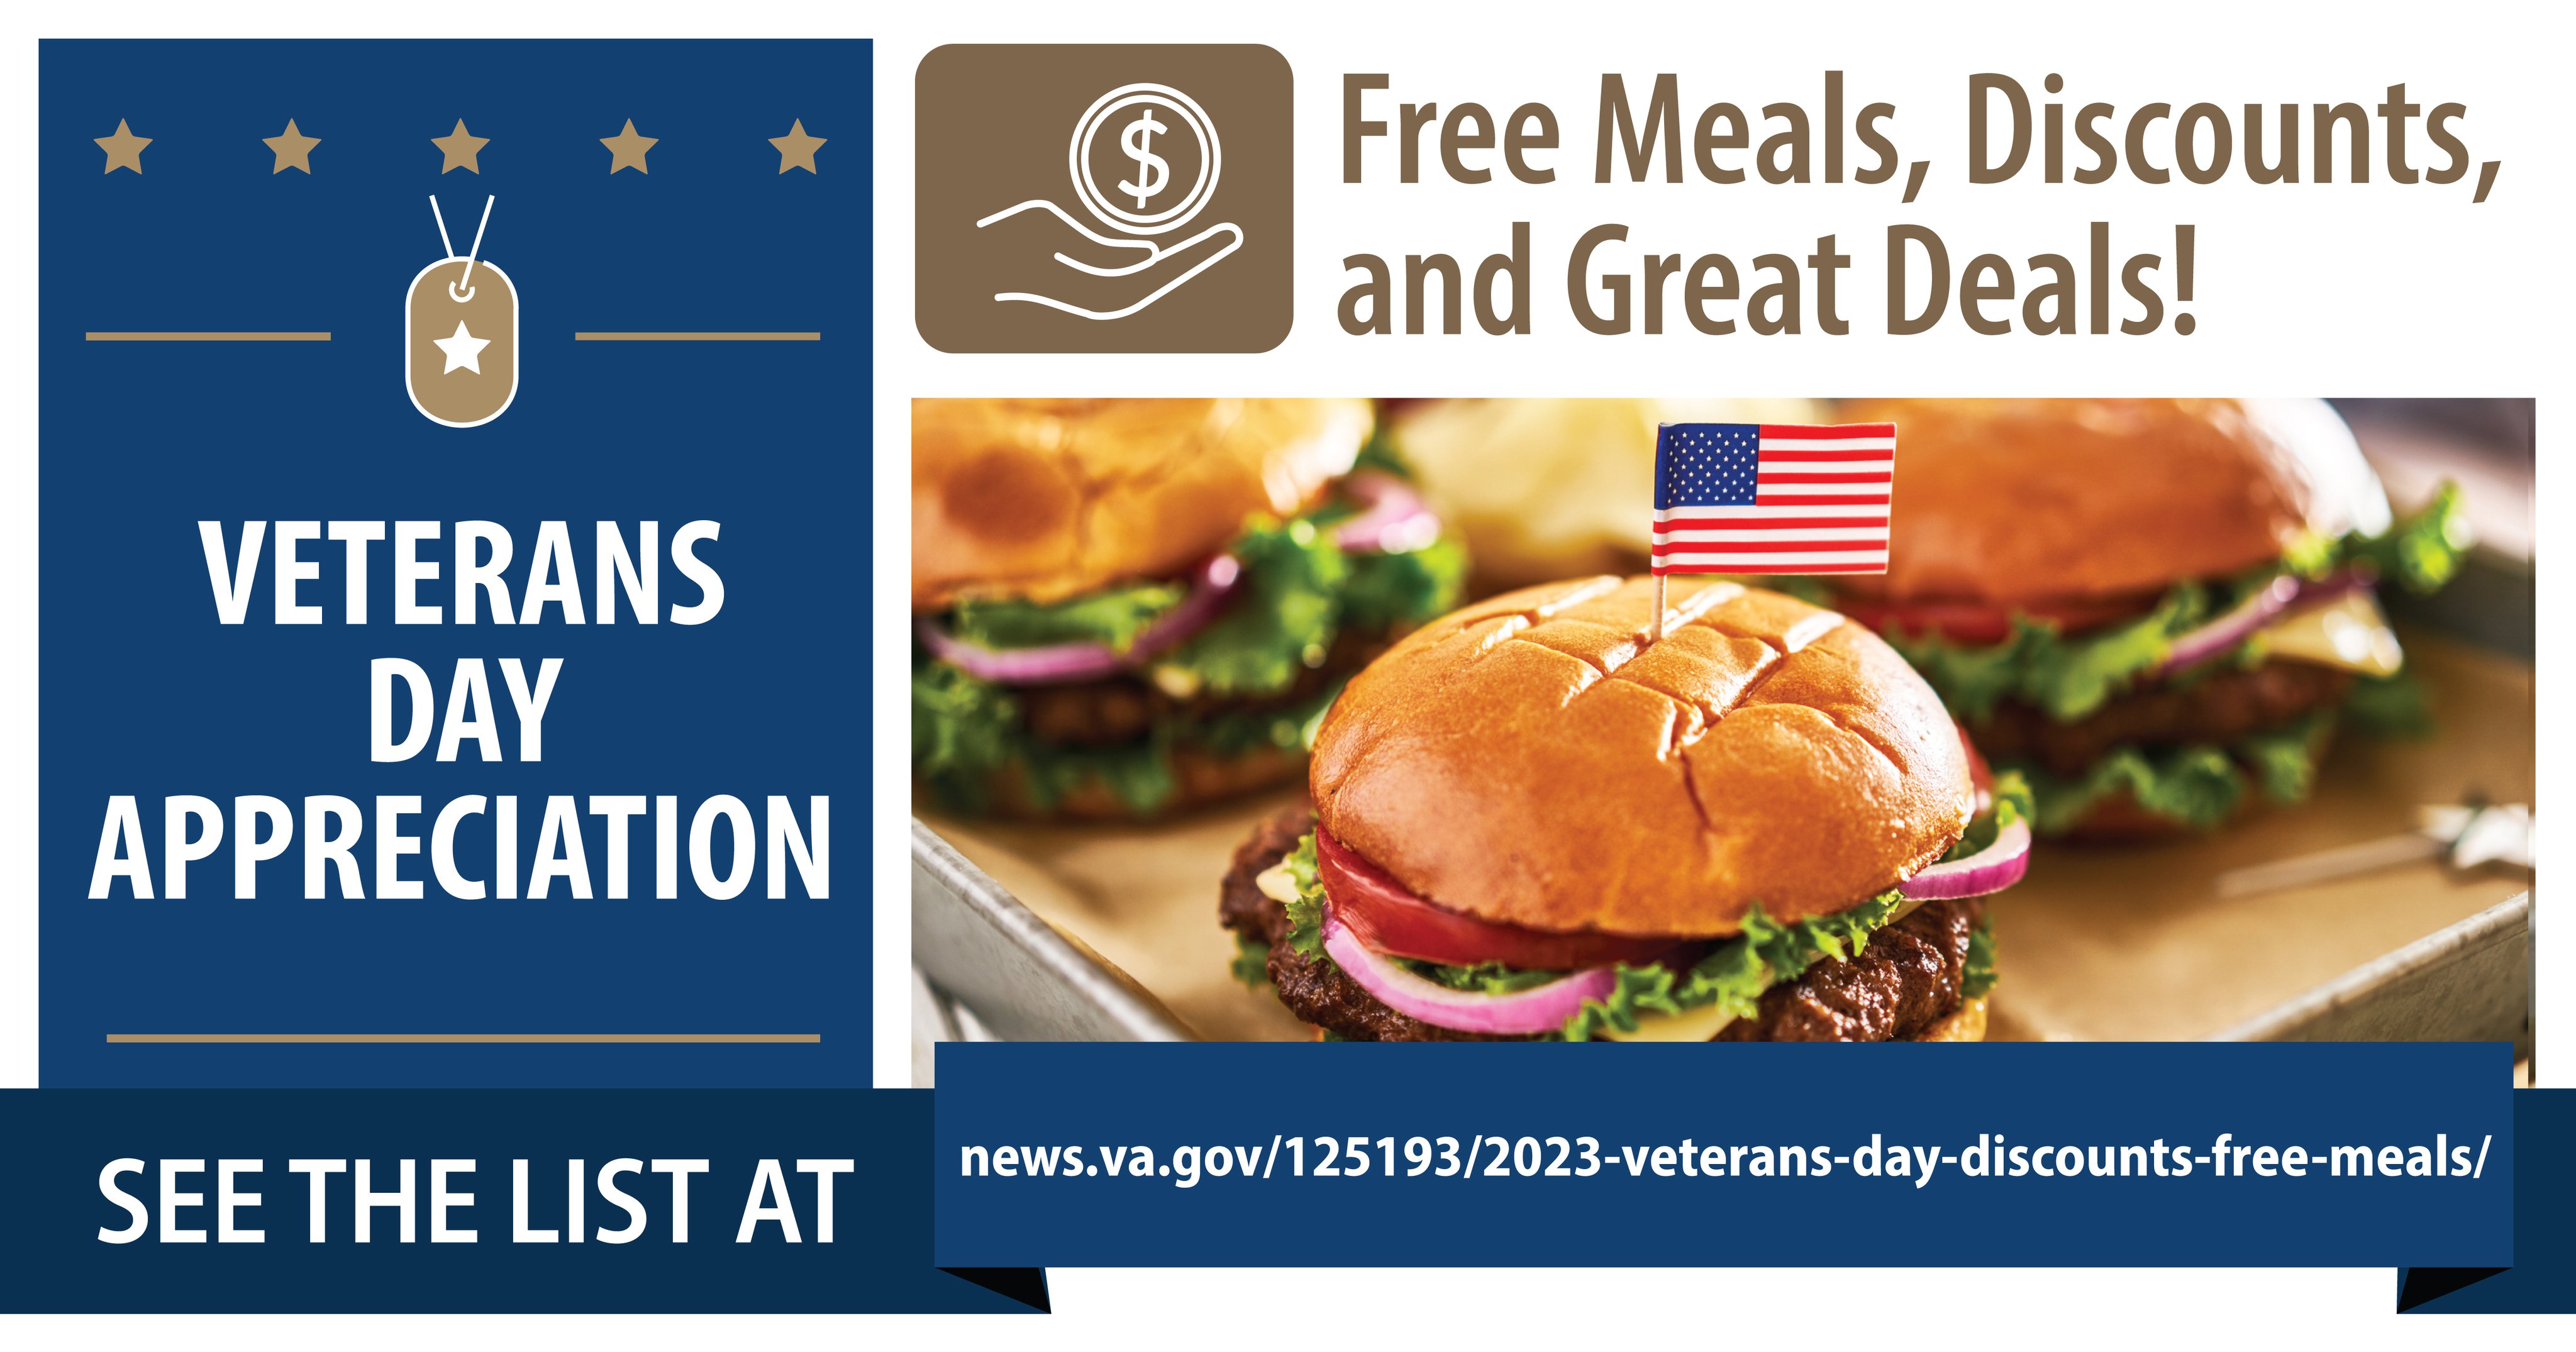 Check out these Veterans Day deals and discounts